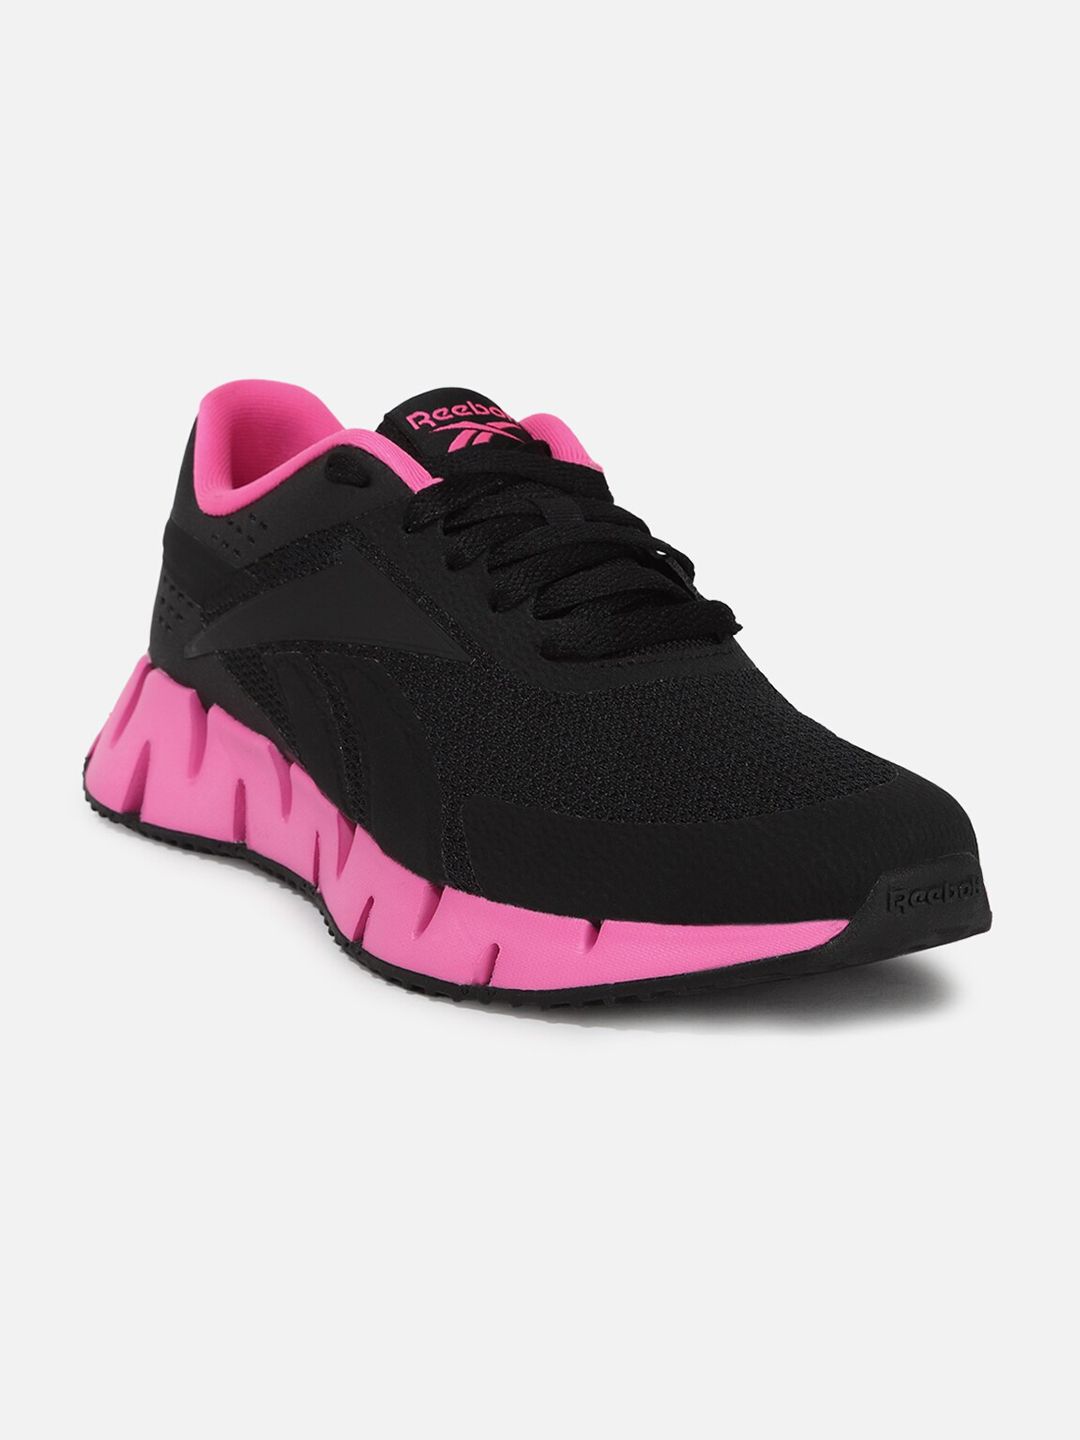 Reebok Women Zig Dynamica 2.0 Sports Running Shoes Price in India